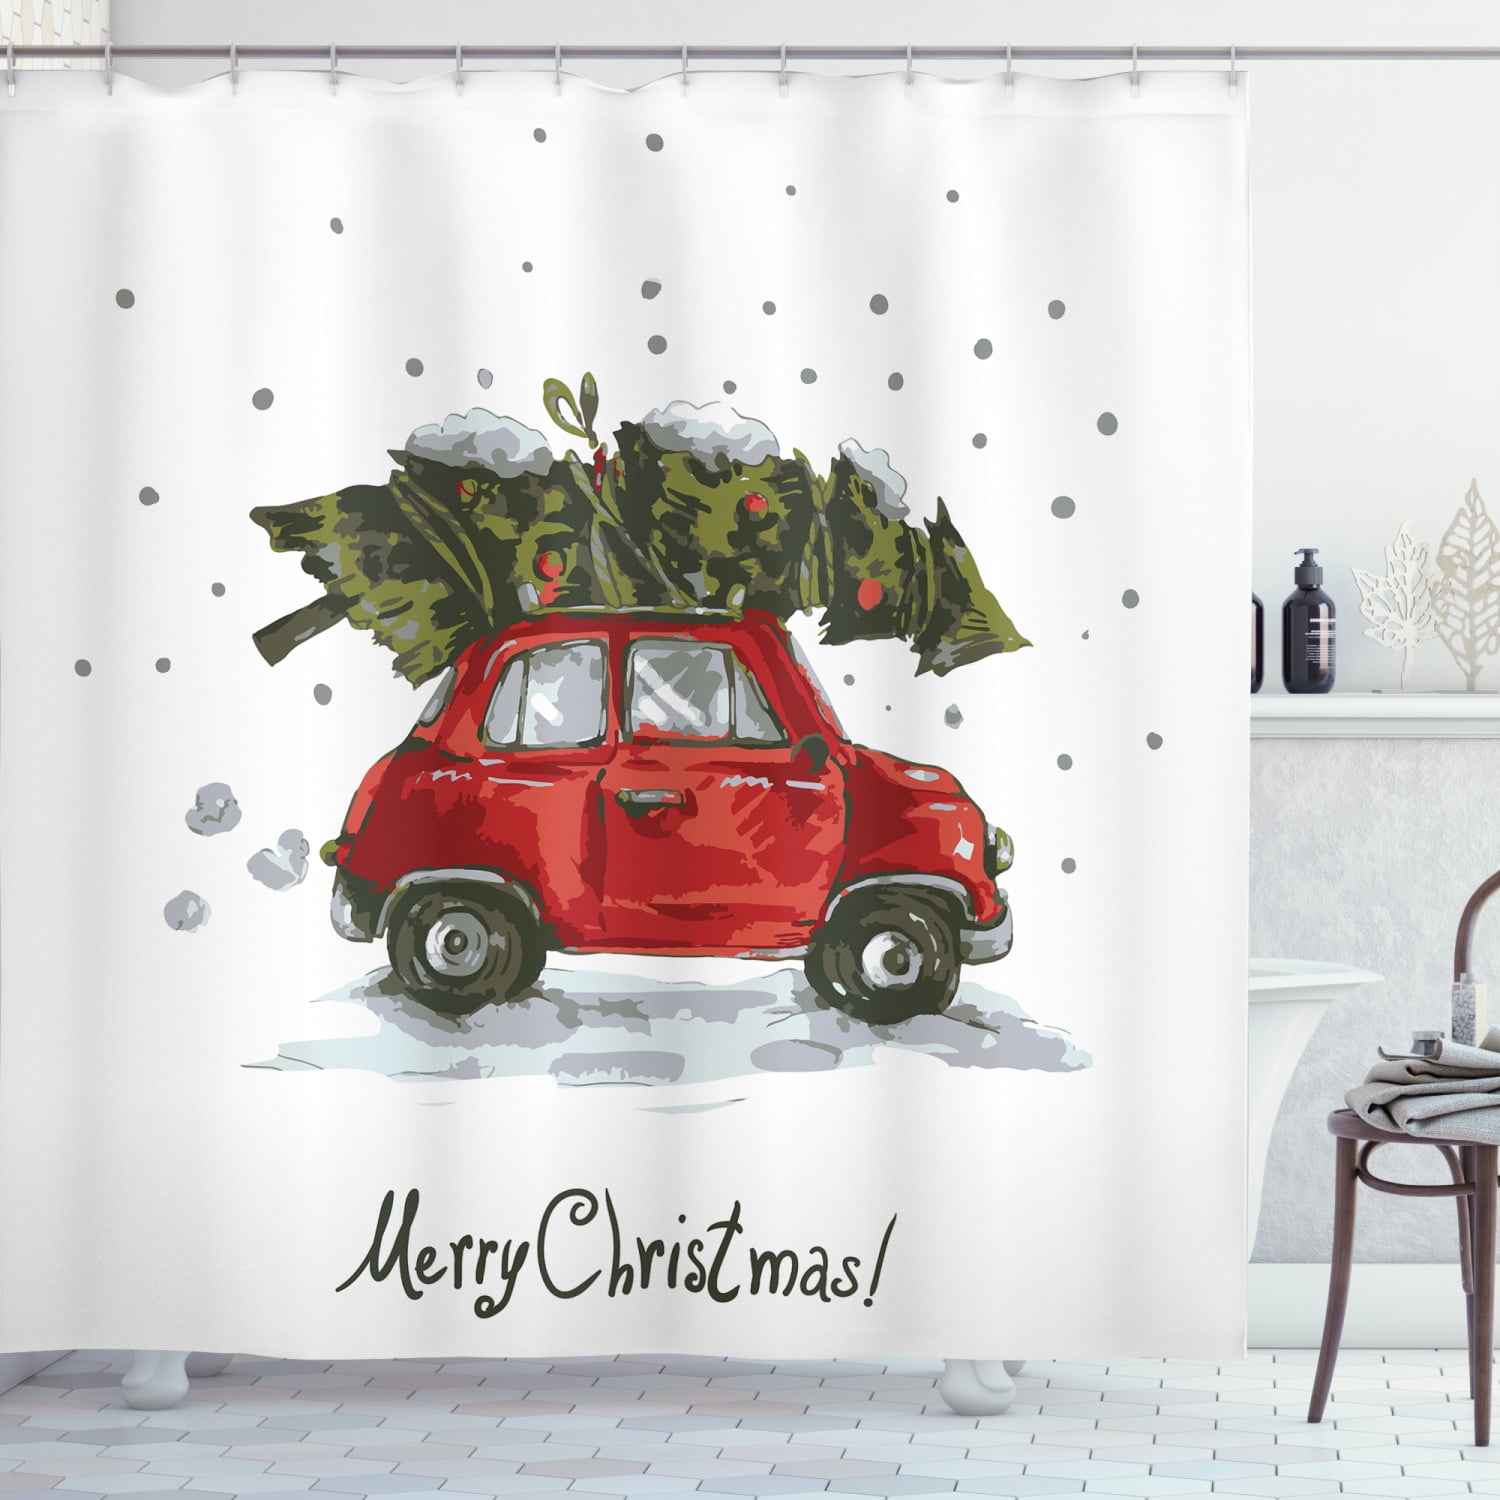 Details about   Christmas Eve Snowy Town Cabins Vintage Car Waterproof Fabric Shower Curtain Set 